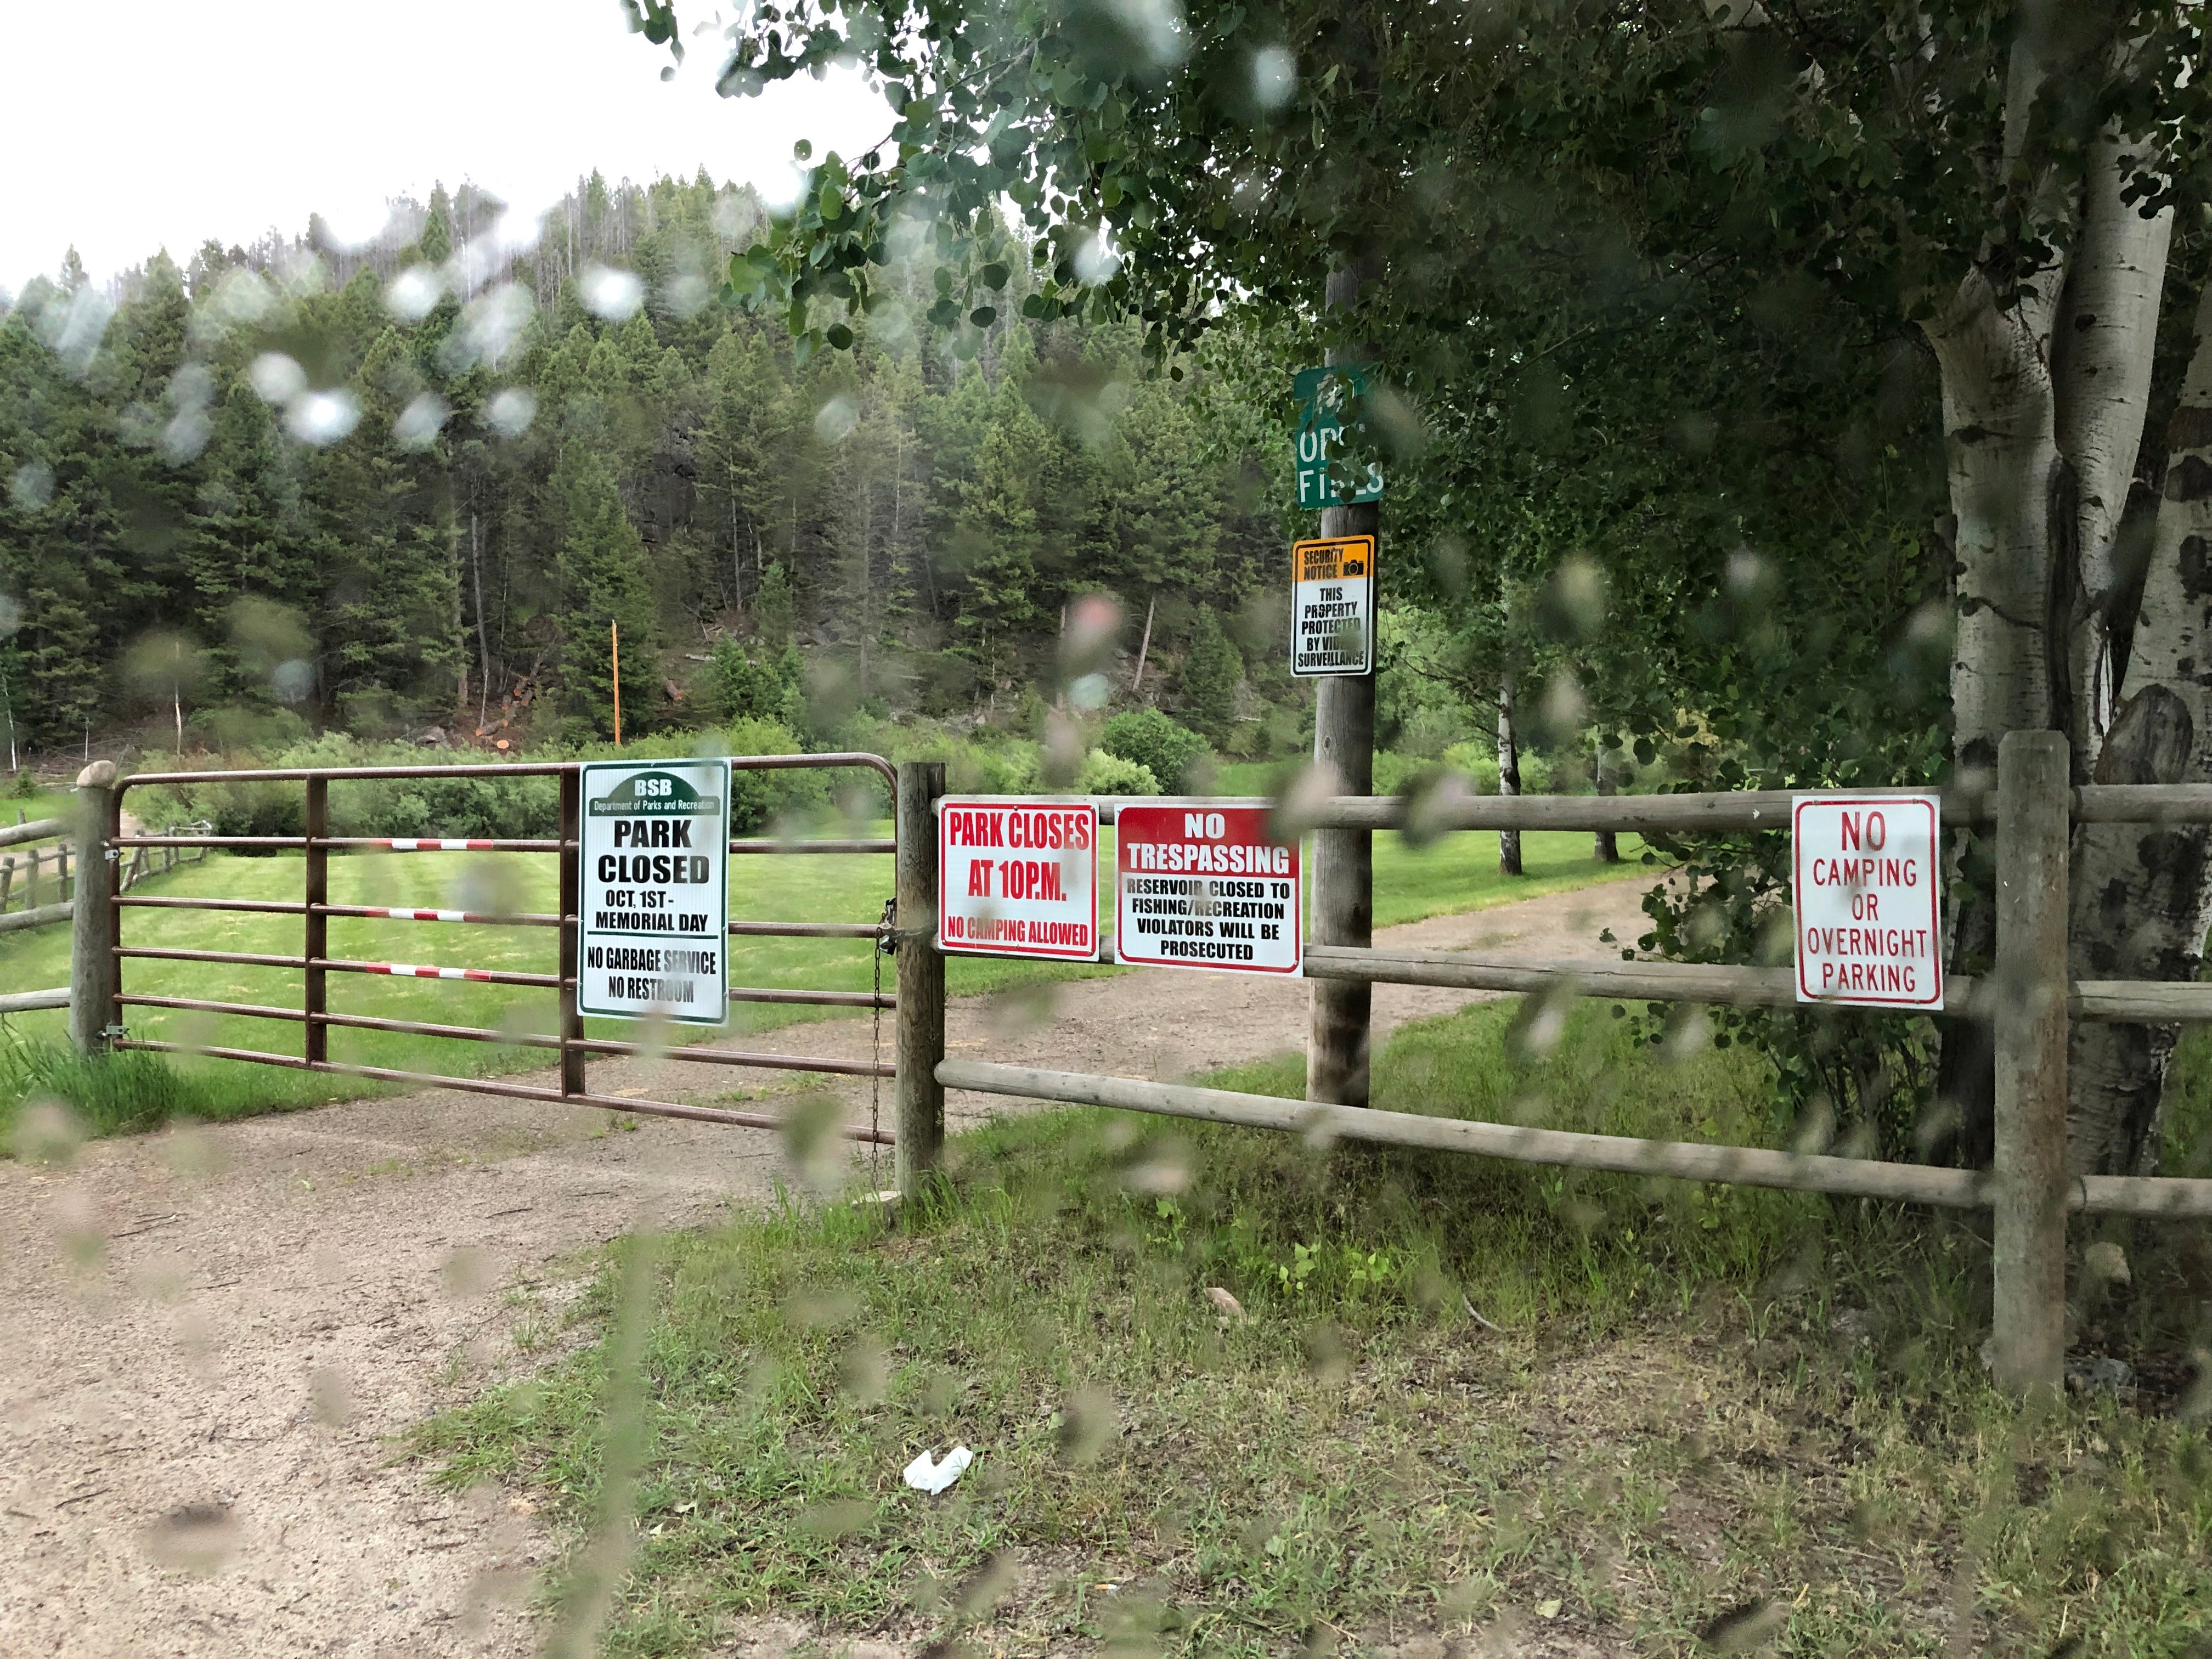 Lots of signs that are different from the forest service website